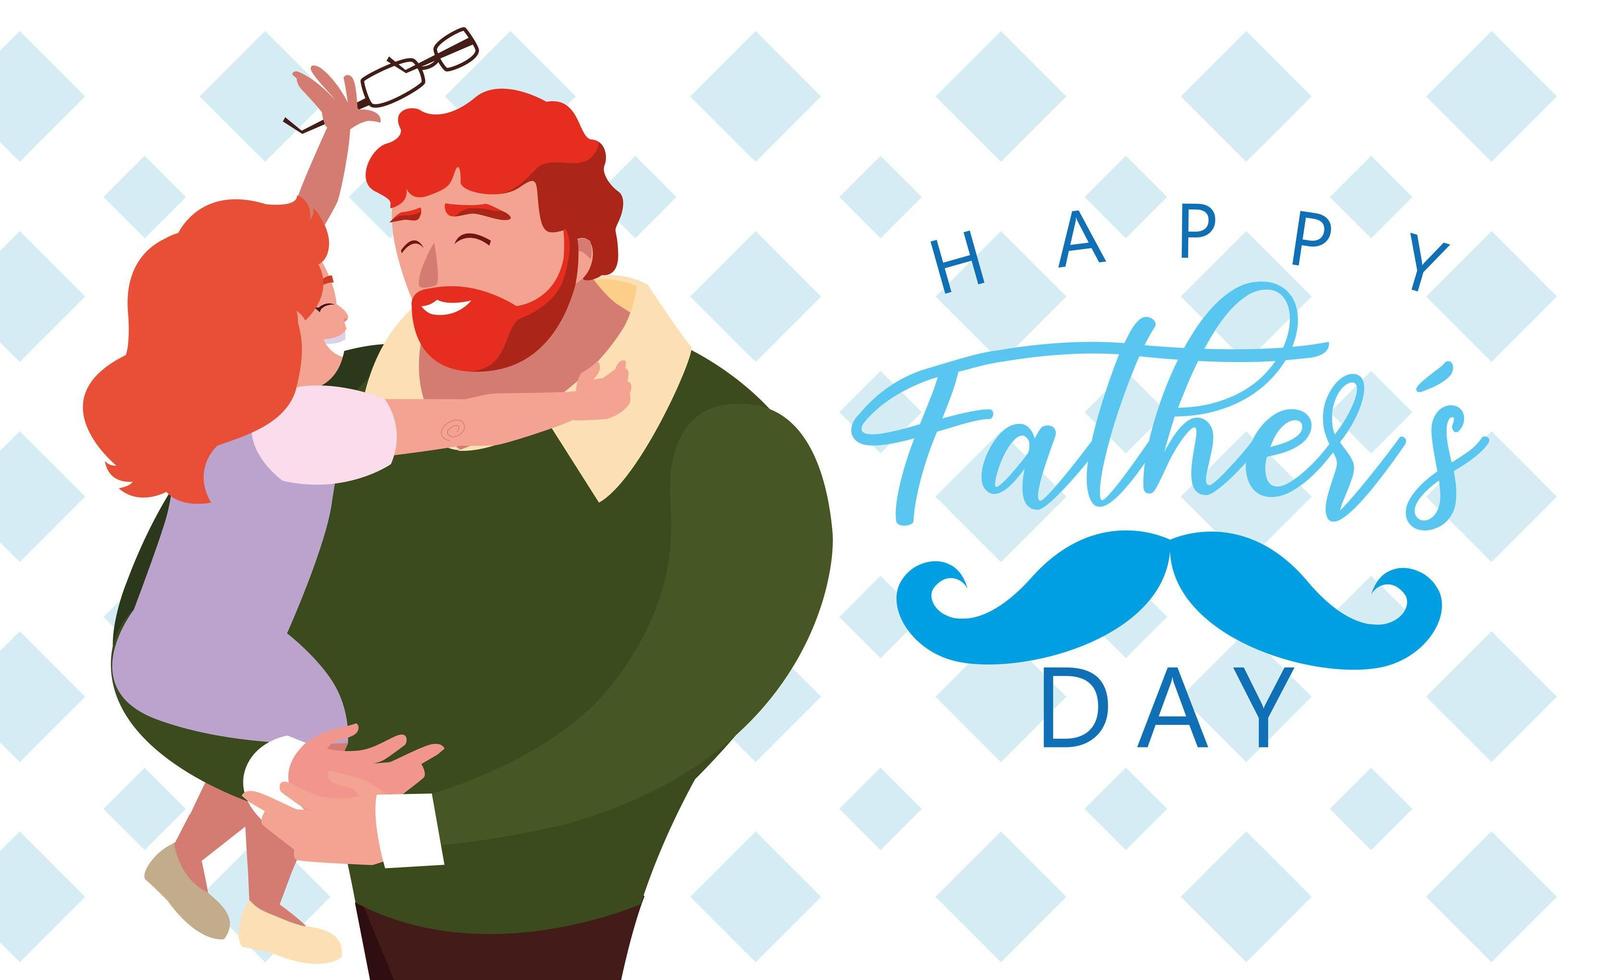 happy father day card with dad and daughter vector